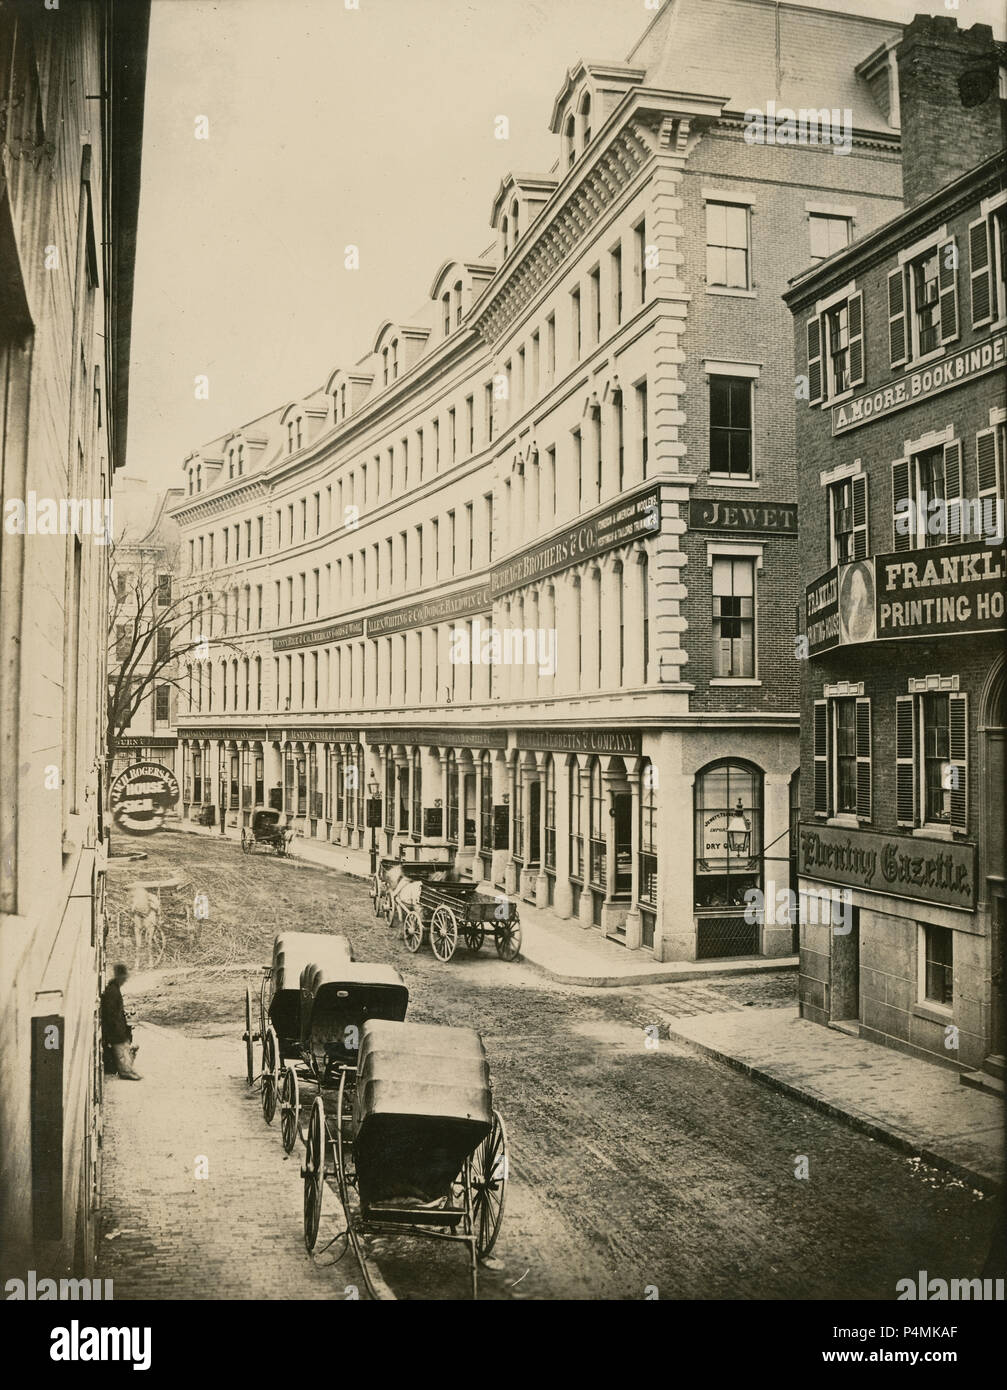 Antique circa 1860 photograph, Franklin Street looking east from Hawley Street, to Arch Street (on right) in Boston, Massachusetts. Old trade signs include Franklin Printing House; Alexander Moore Bookbinder; Burrage Brothers & Co.; Jewett Tebbetts & Co.; Allen Whiting & Co.; Dodge Baldwin & Co.; Austin Sumner & Co.; Denny Rice & Co. American Goods & Wool; B.C. Howard & Co.; Woodman Horswell & Co.; Wilkinson Stetson & Co.; J.W.H. Rogers & Co. House and Sign Painting. Most of the area was destroyed in the Great Boston fire of 1872. SOURCE: LATER GENERATION HIGH QUALITY PHOTOGRAPH Stock Photo